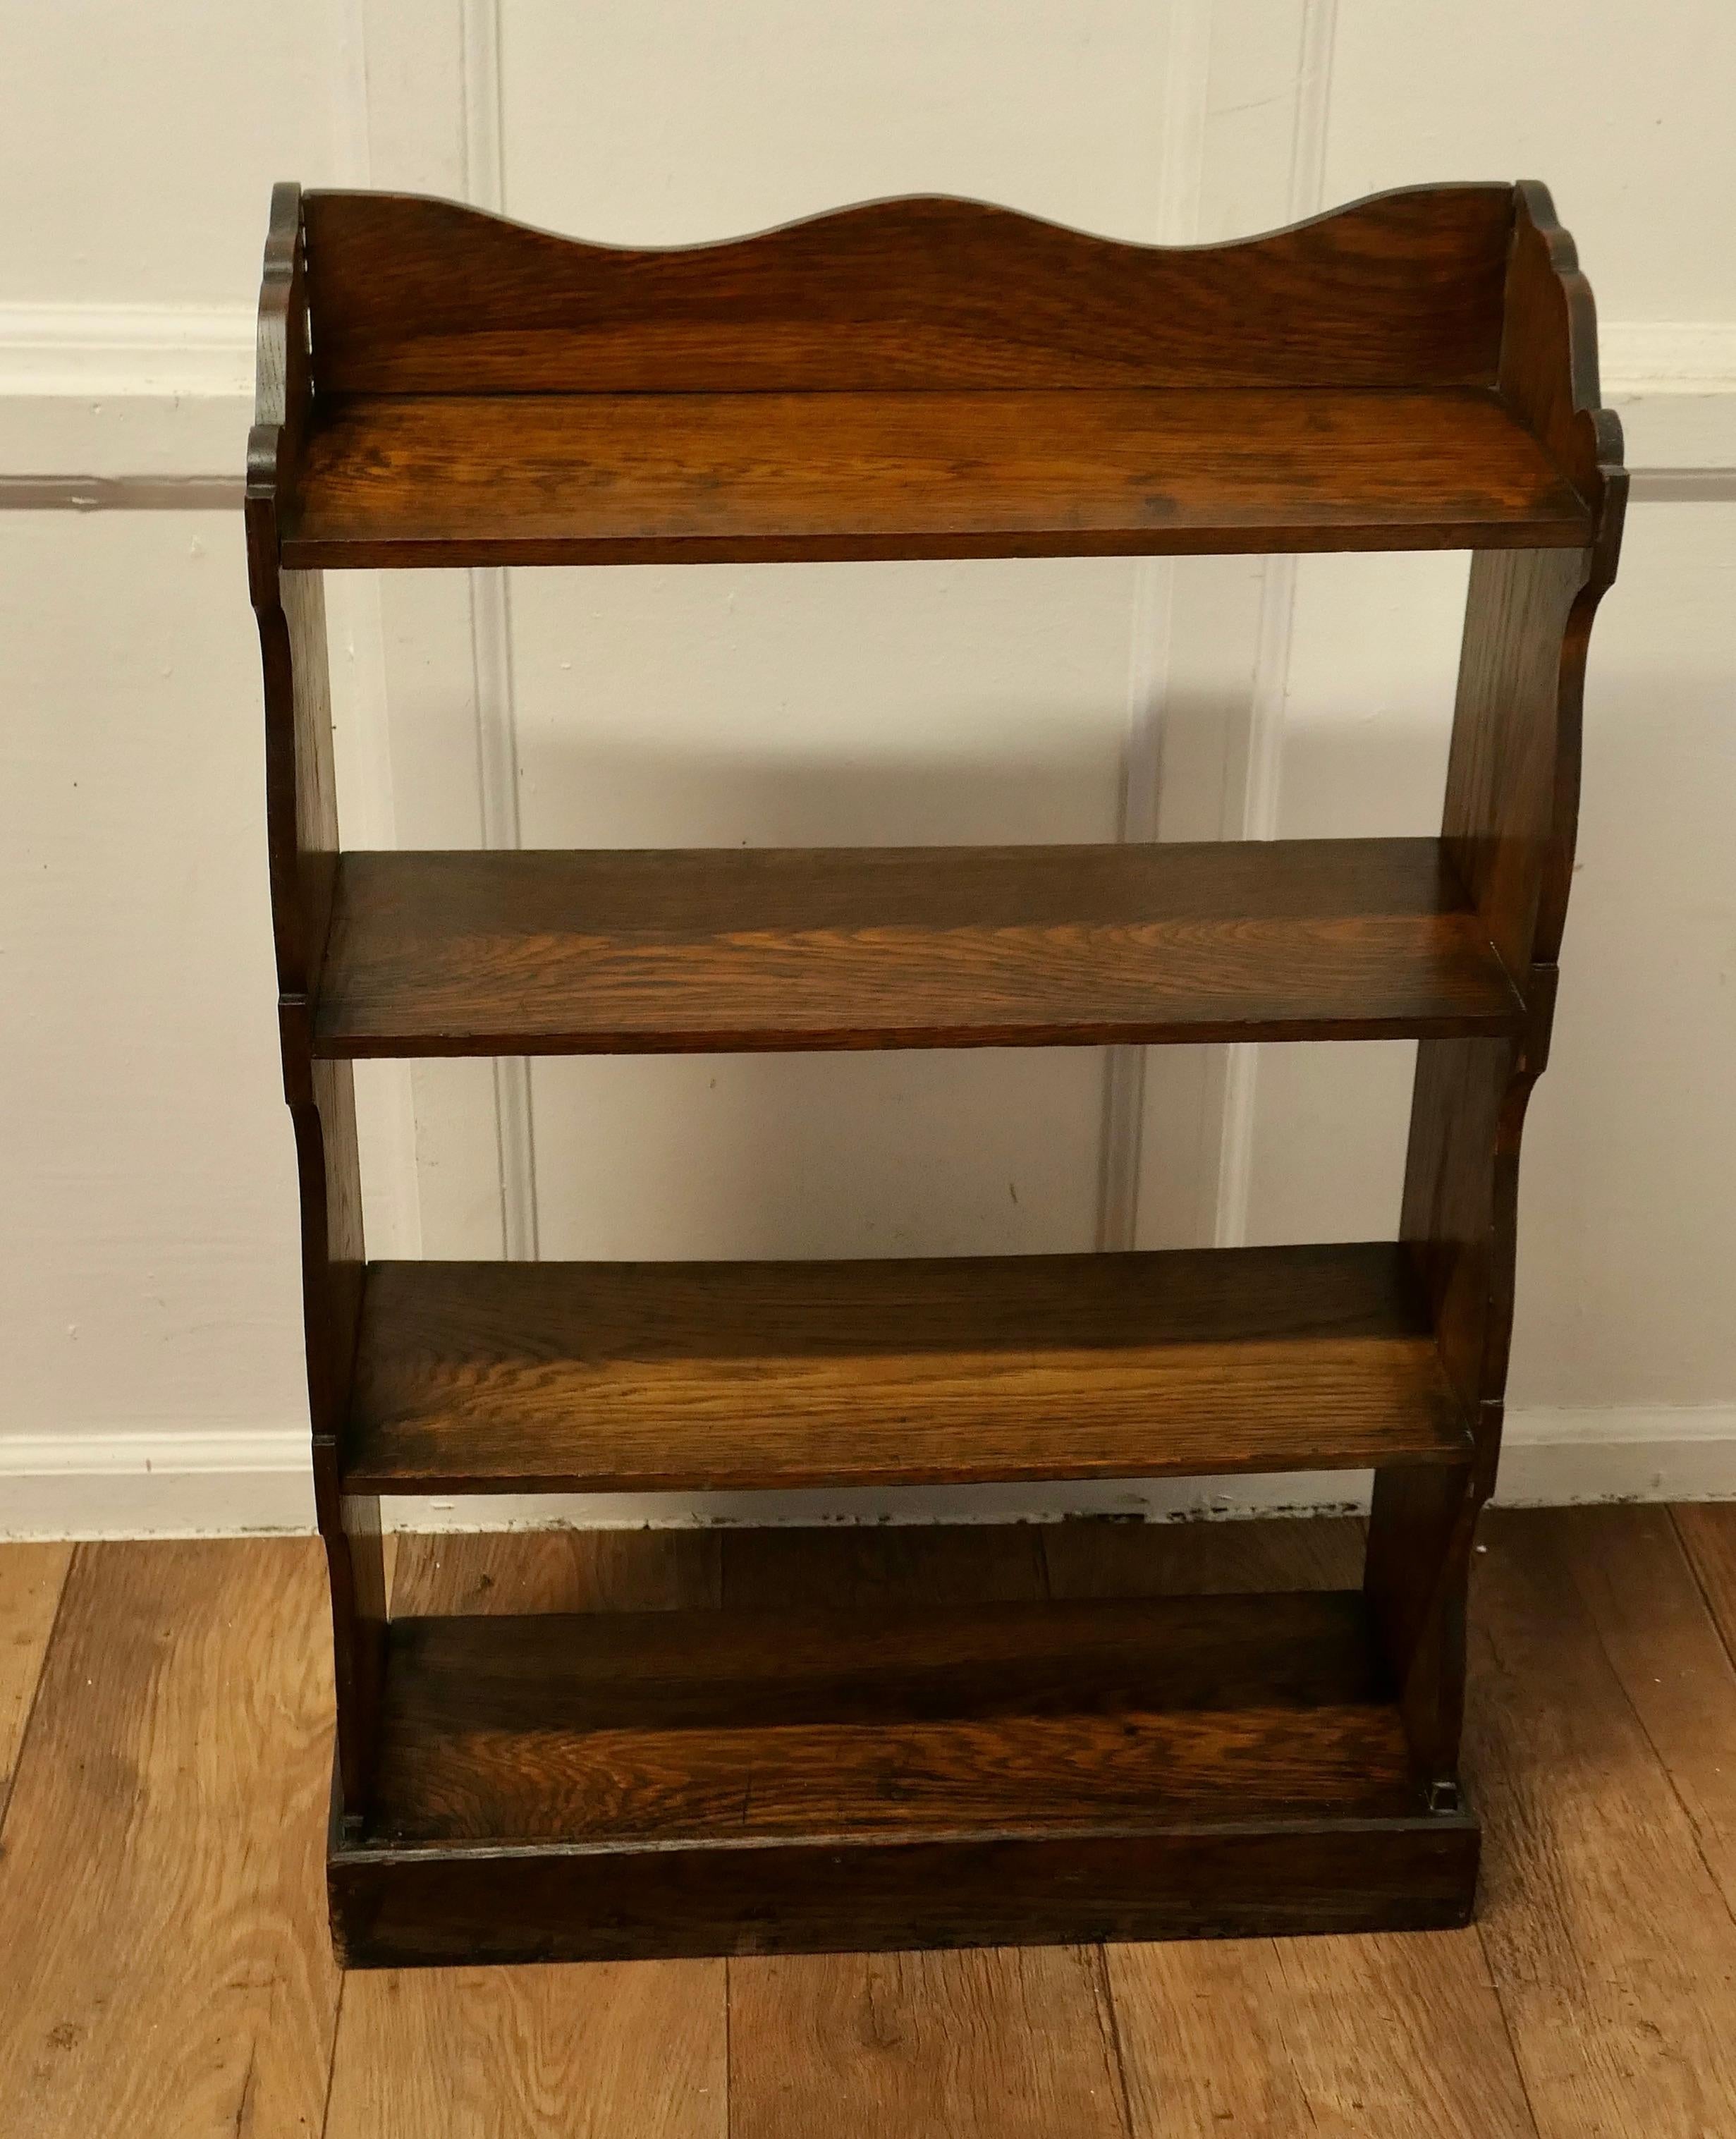 Late 19th Century Arts and Crafts Oak Open Front Bookcase.  This Oak bookcase has 4 open shelves a For Sale